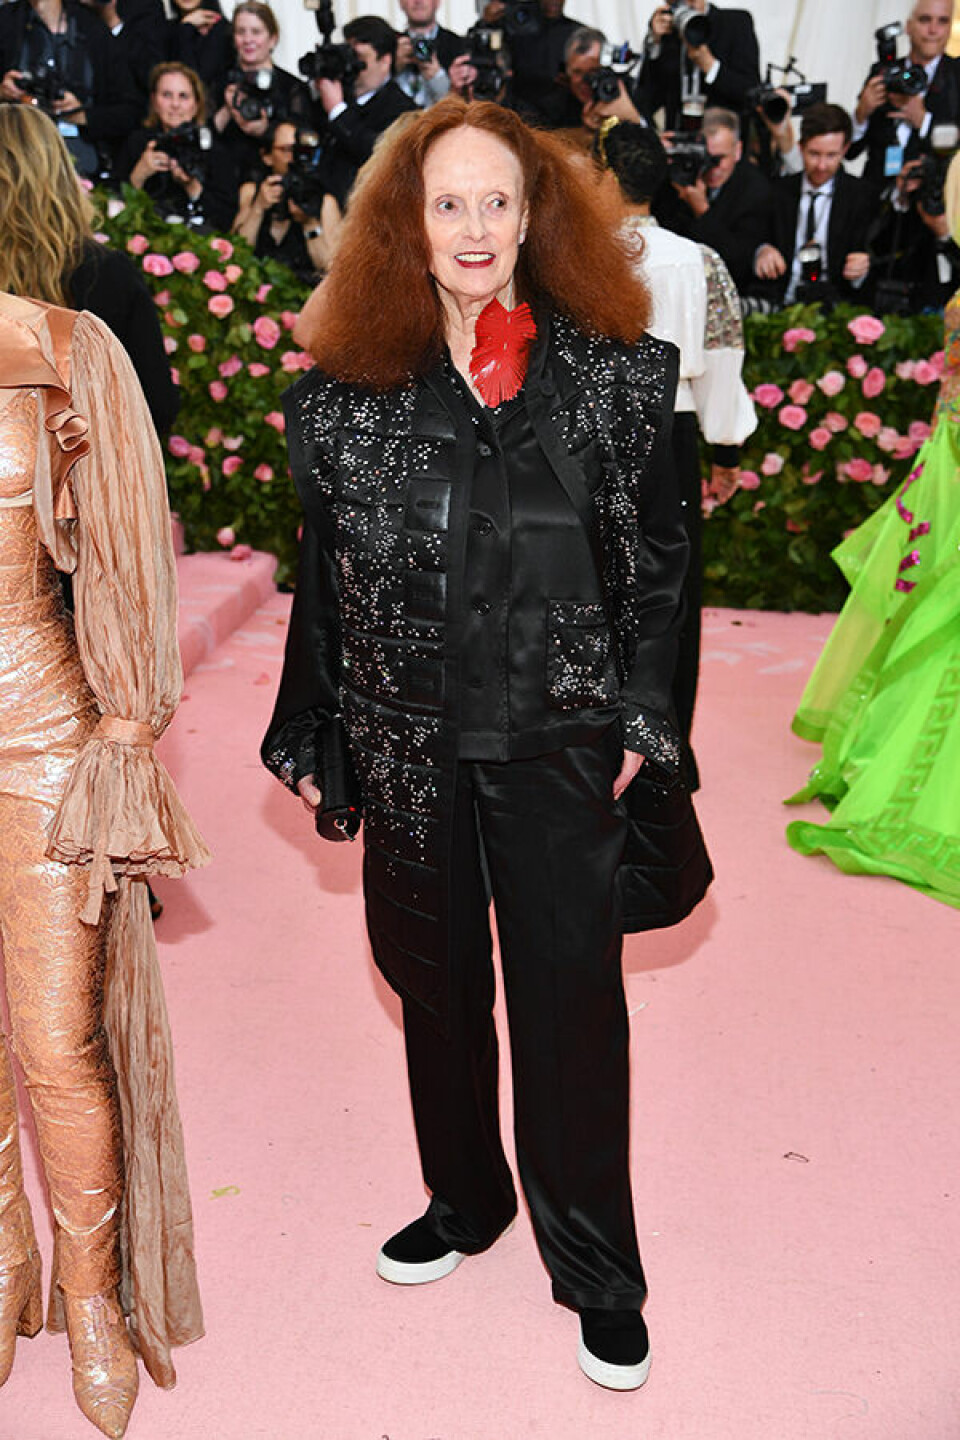 NEW YORK, NEW YORK – MAY 06: Grace Coddington attends The 2019 Met Gala Celebrating Camp: Notes on Fashion at Metropolitan Museum of Art on May 06, 2019 in New York City. (Photo by Dimitrios Kambouris/Getty Images for The Met Museum/Vogue)